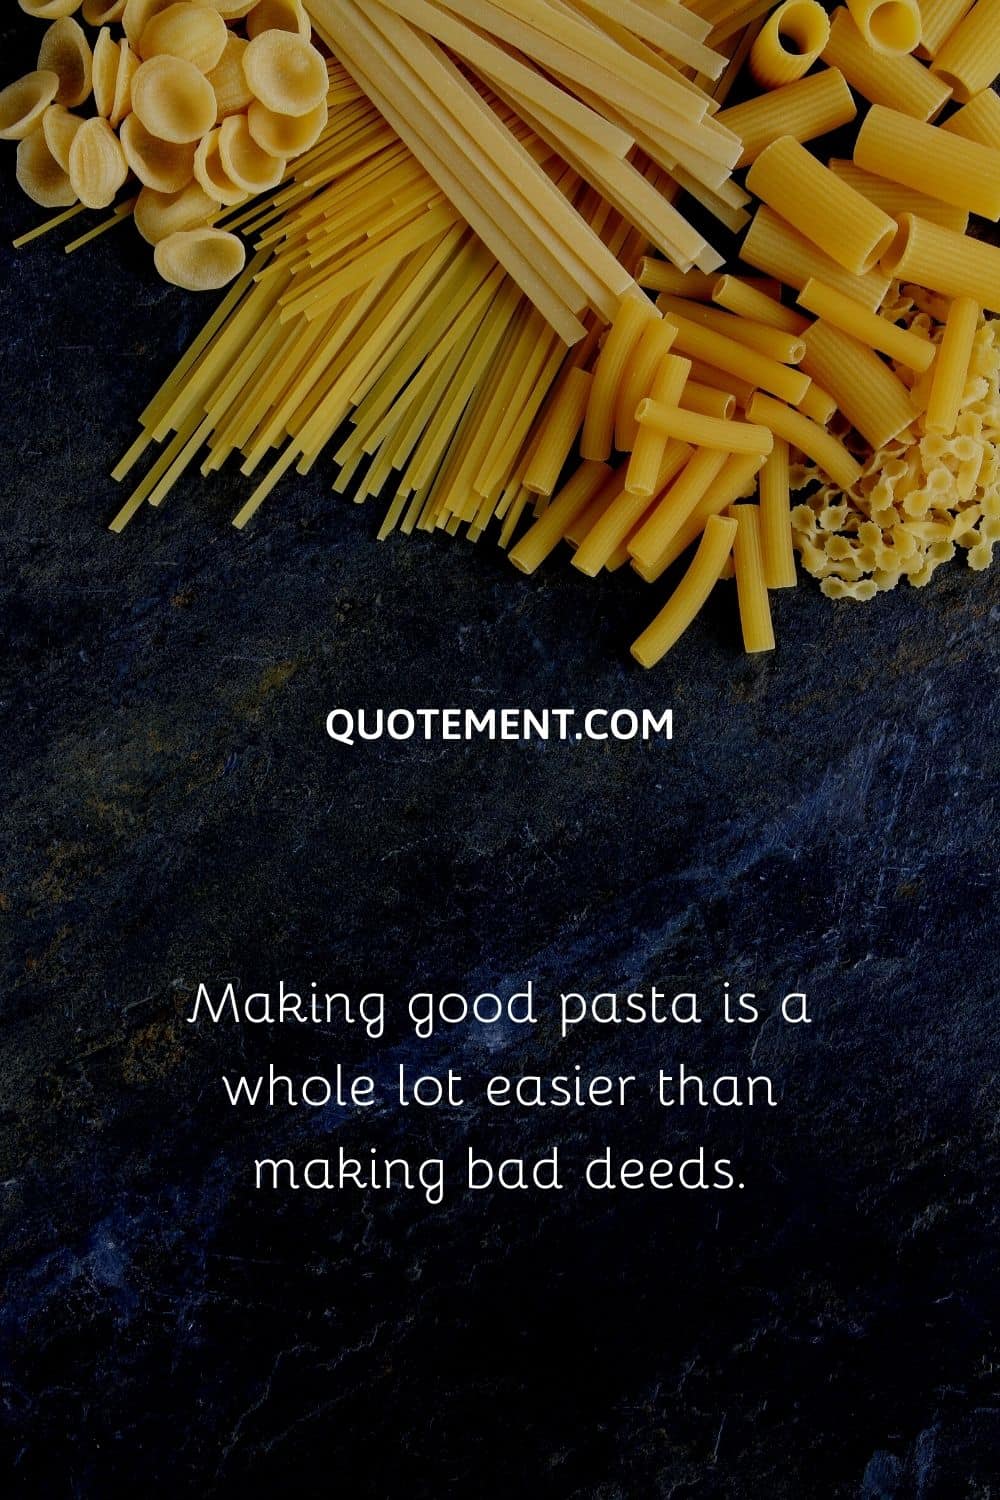 Making good pasta is a whole lot easier than making bad deeds